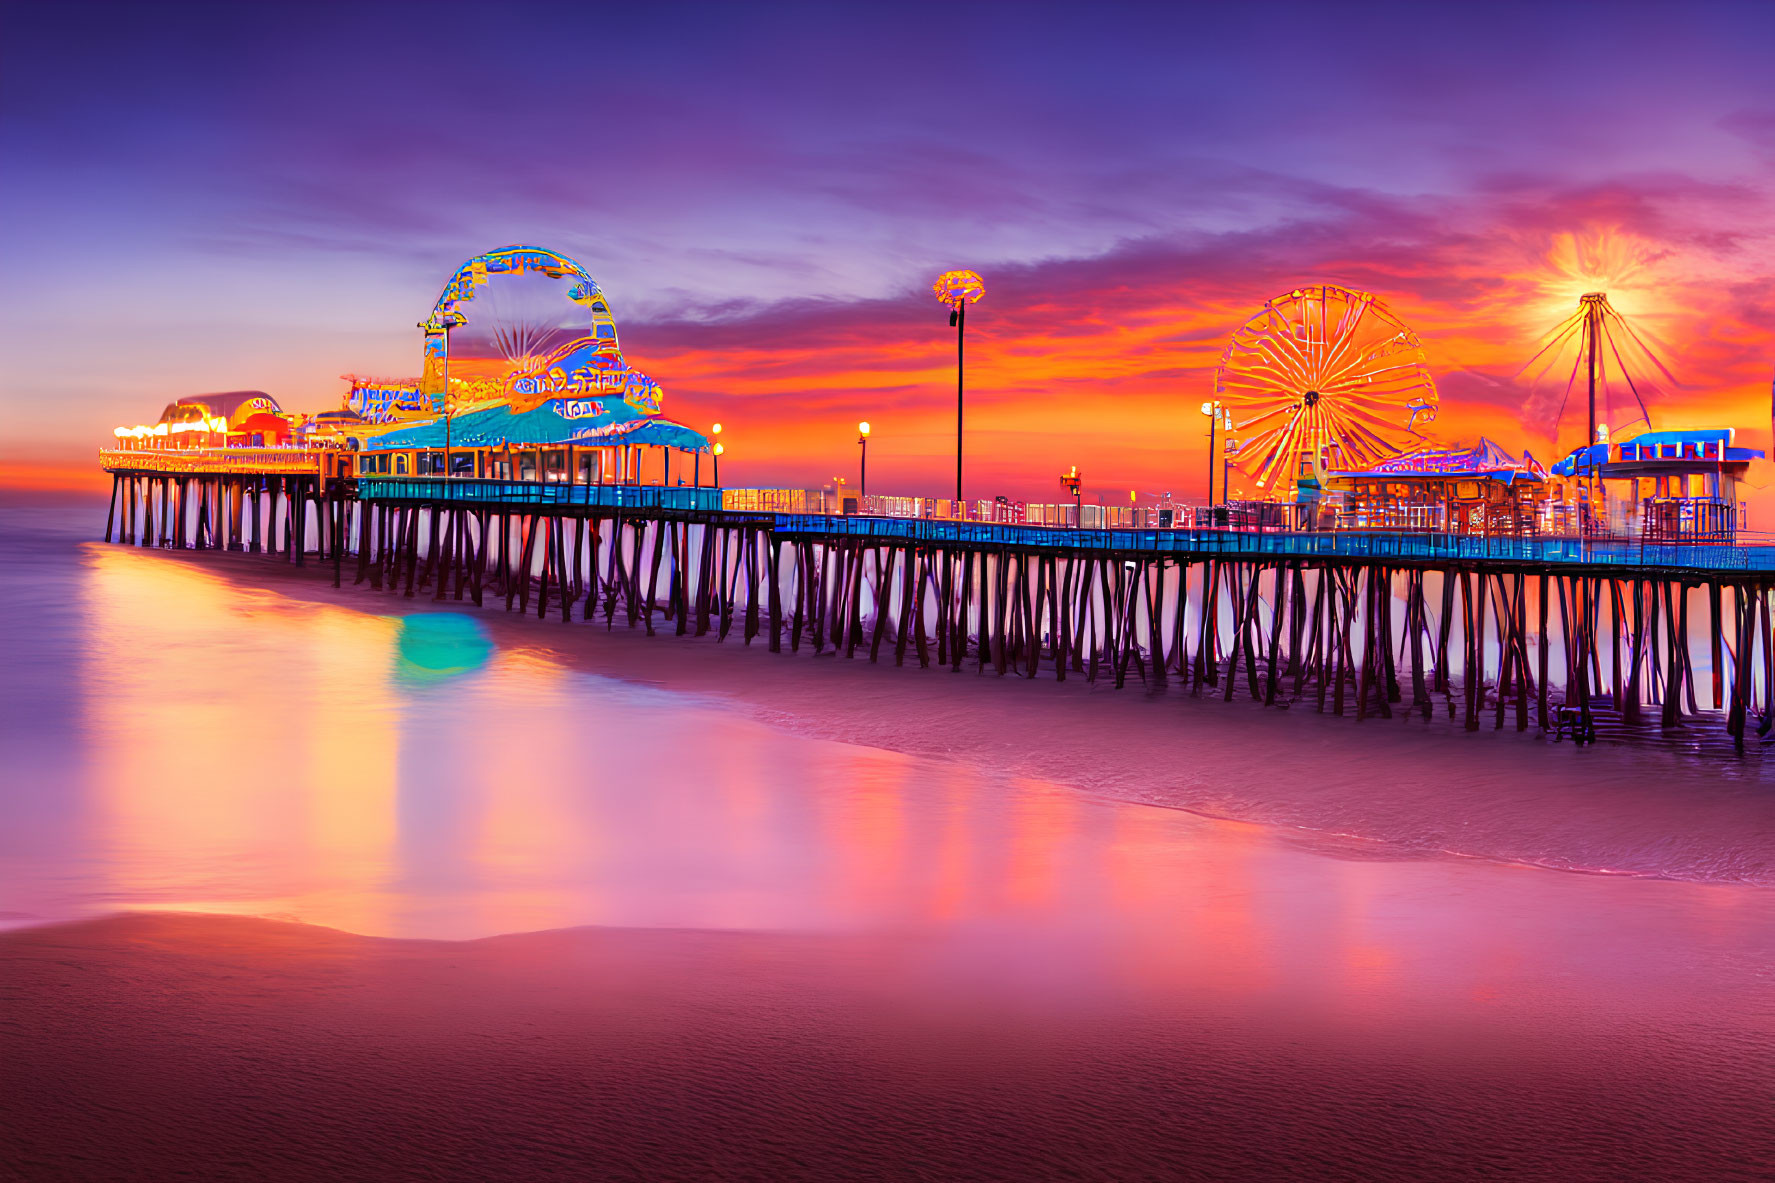 Scenic beach sunset with pier and amusement park silhouettes